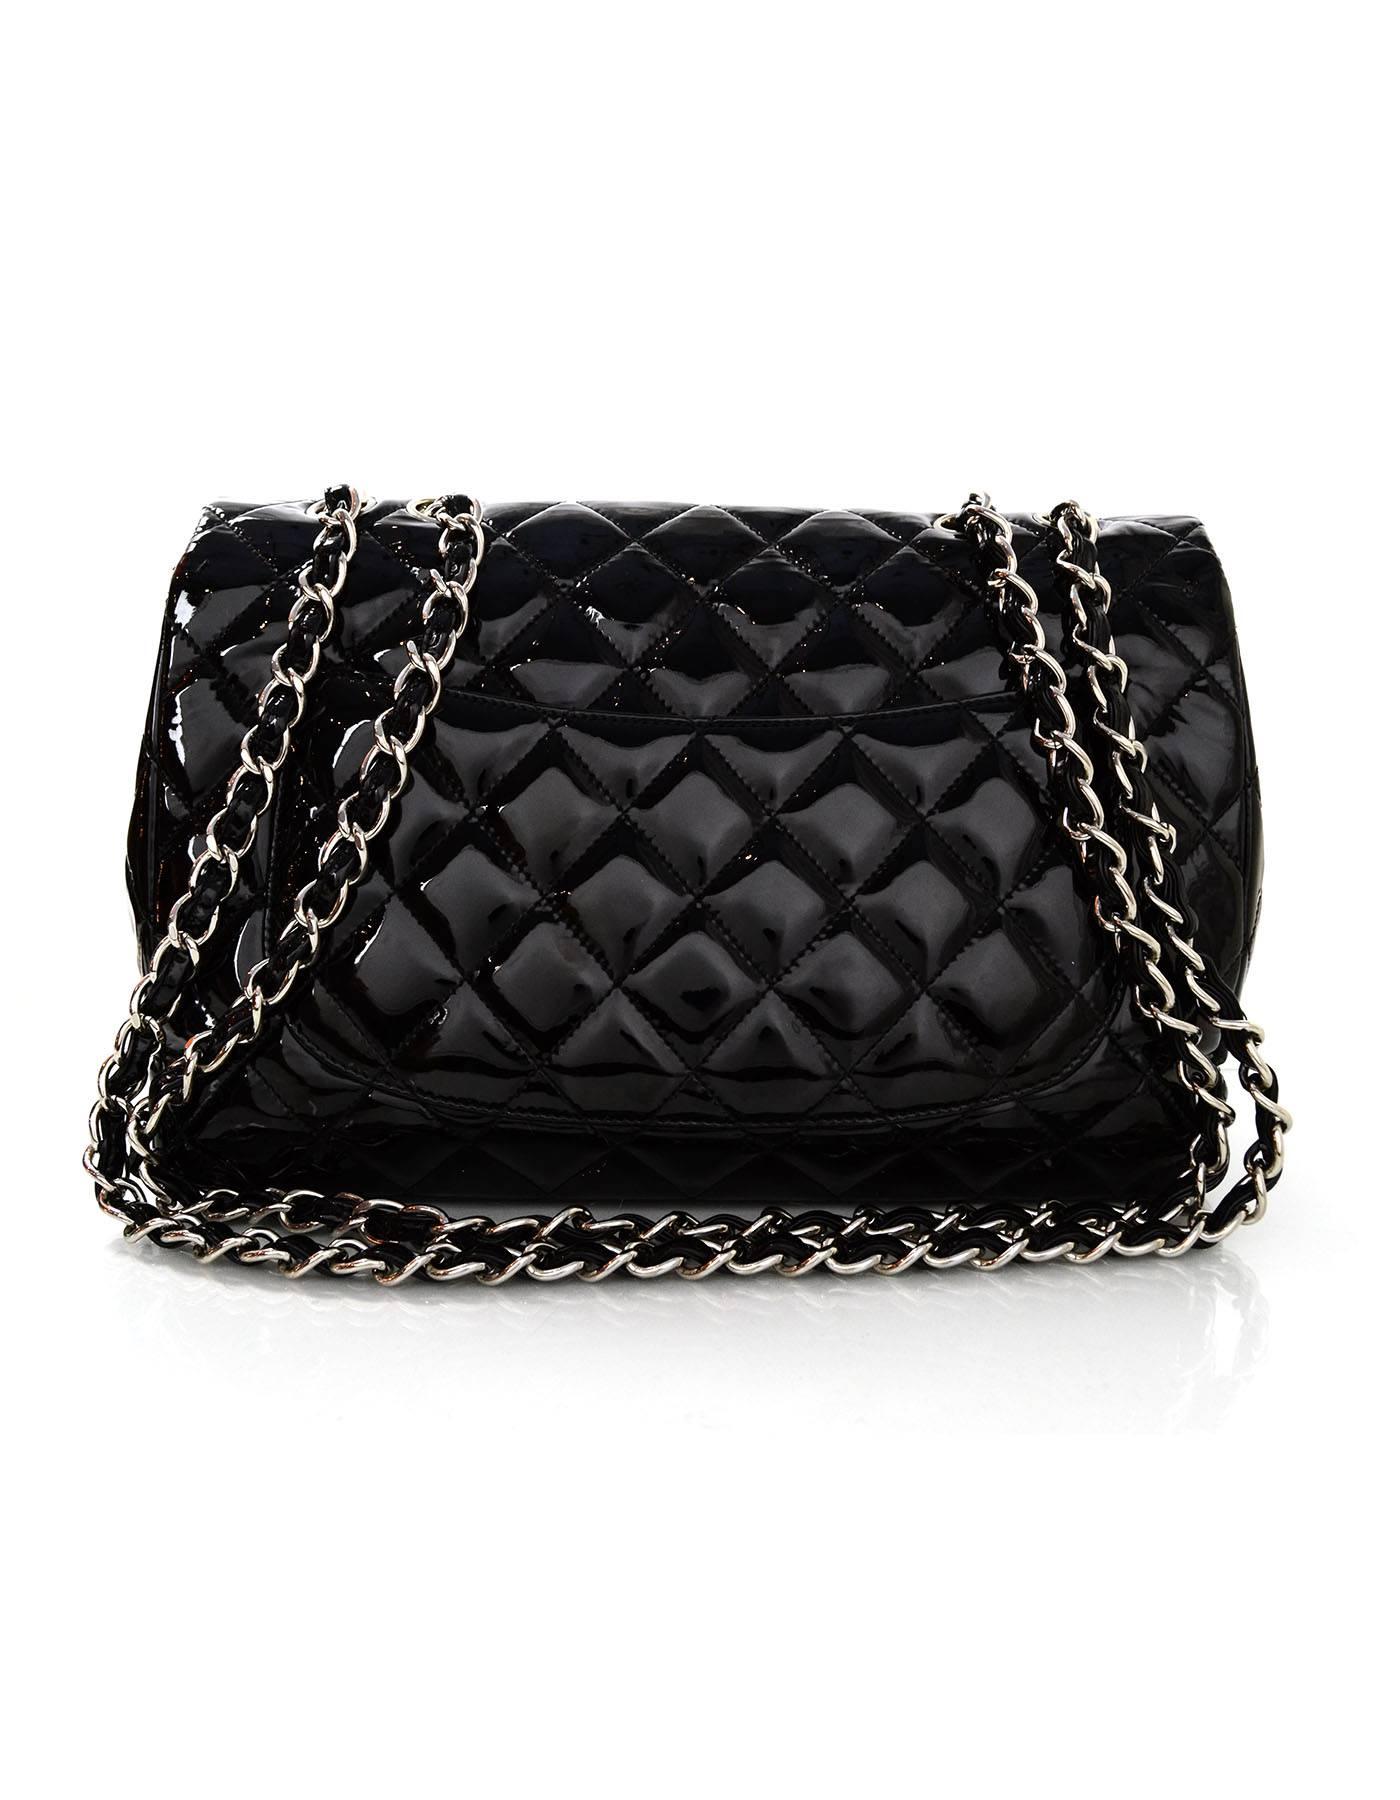 Chanel Black Quilted Patent Jumbo Classic Flap Bag
Features adjustable shoulder strap

Made In: Italy
Year of Production: 2010
Color: Black
Hardware: Silvertone
Materials: Patent leather
Lining: Black leather
Closure/Opening: Flap top with